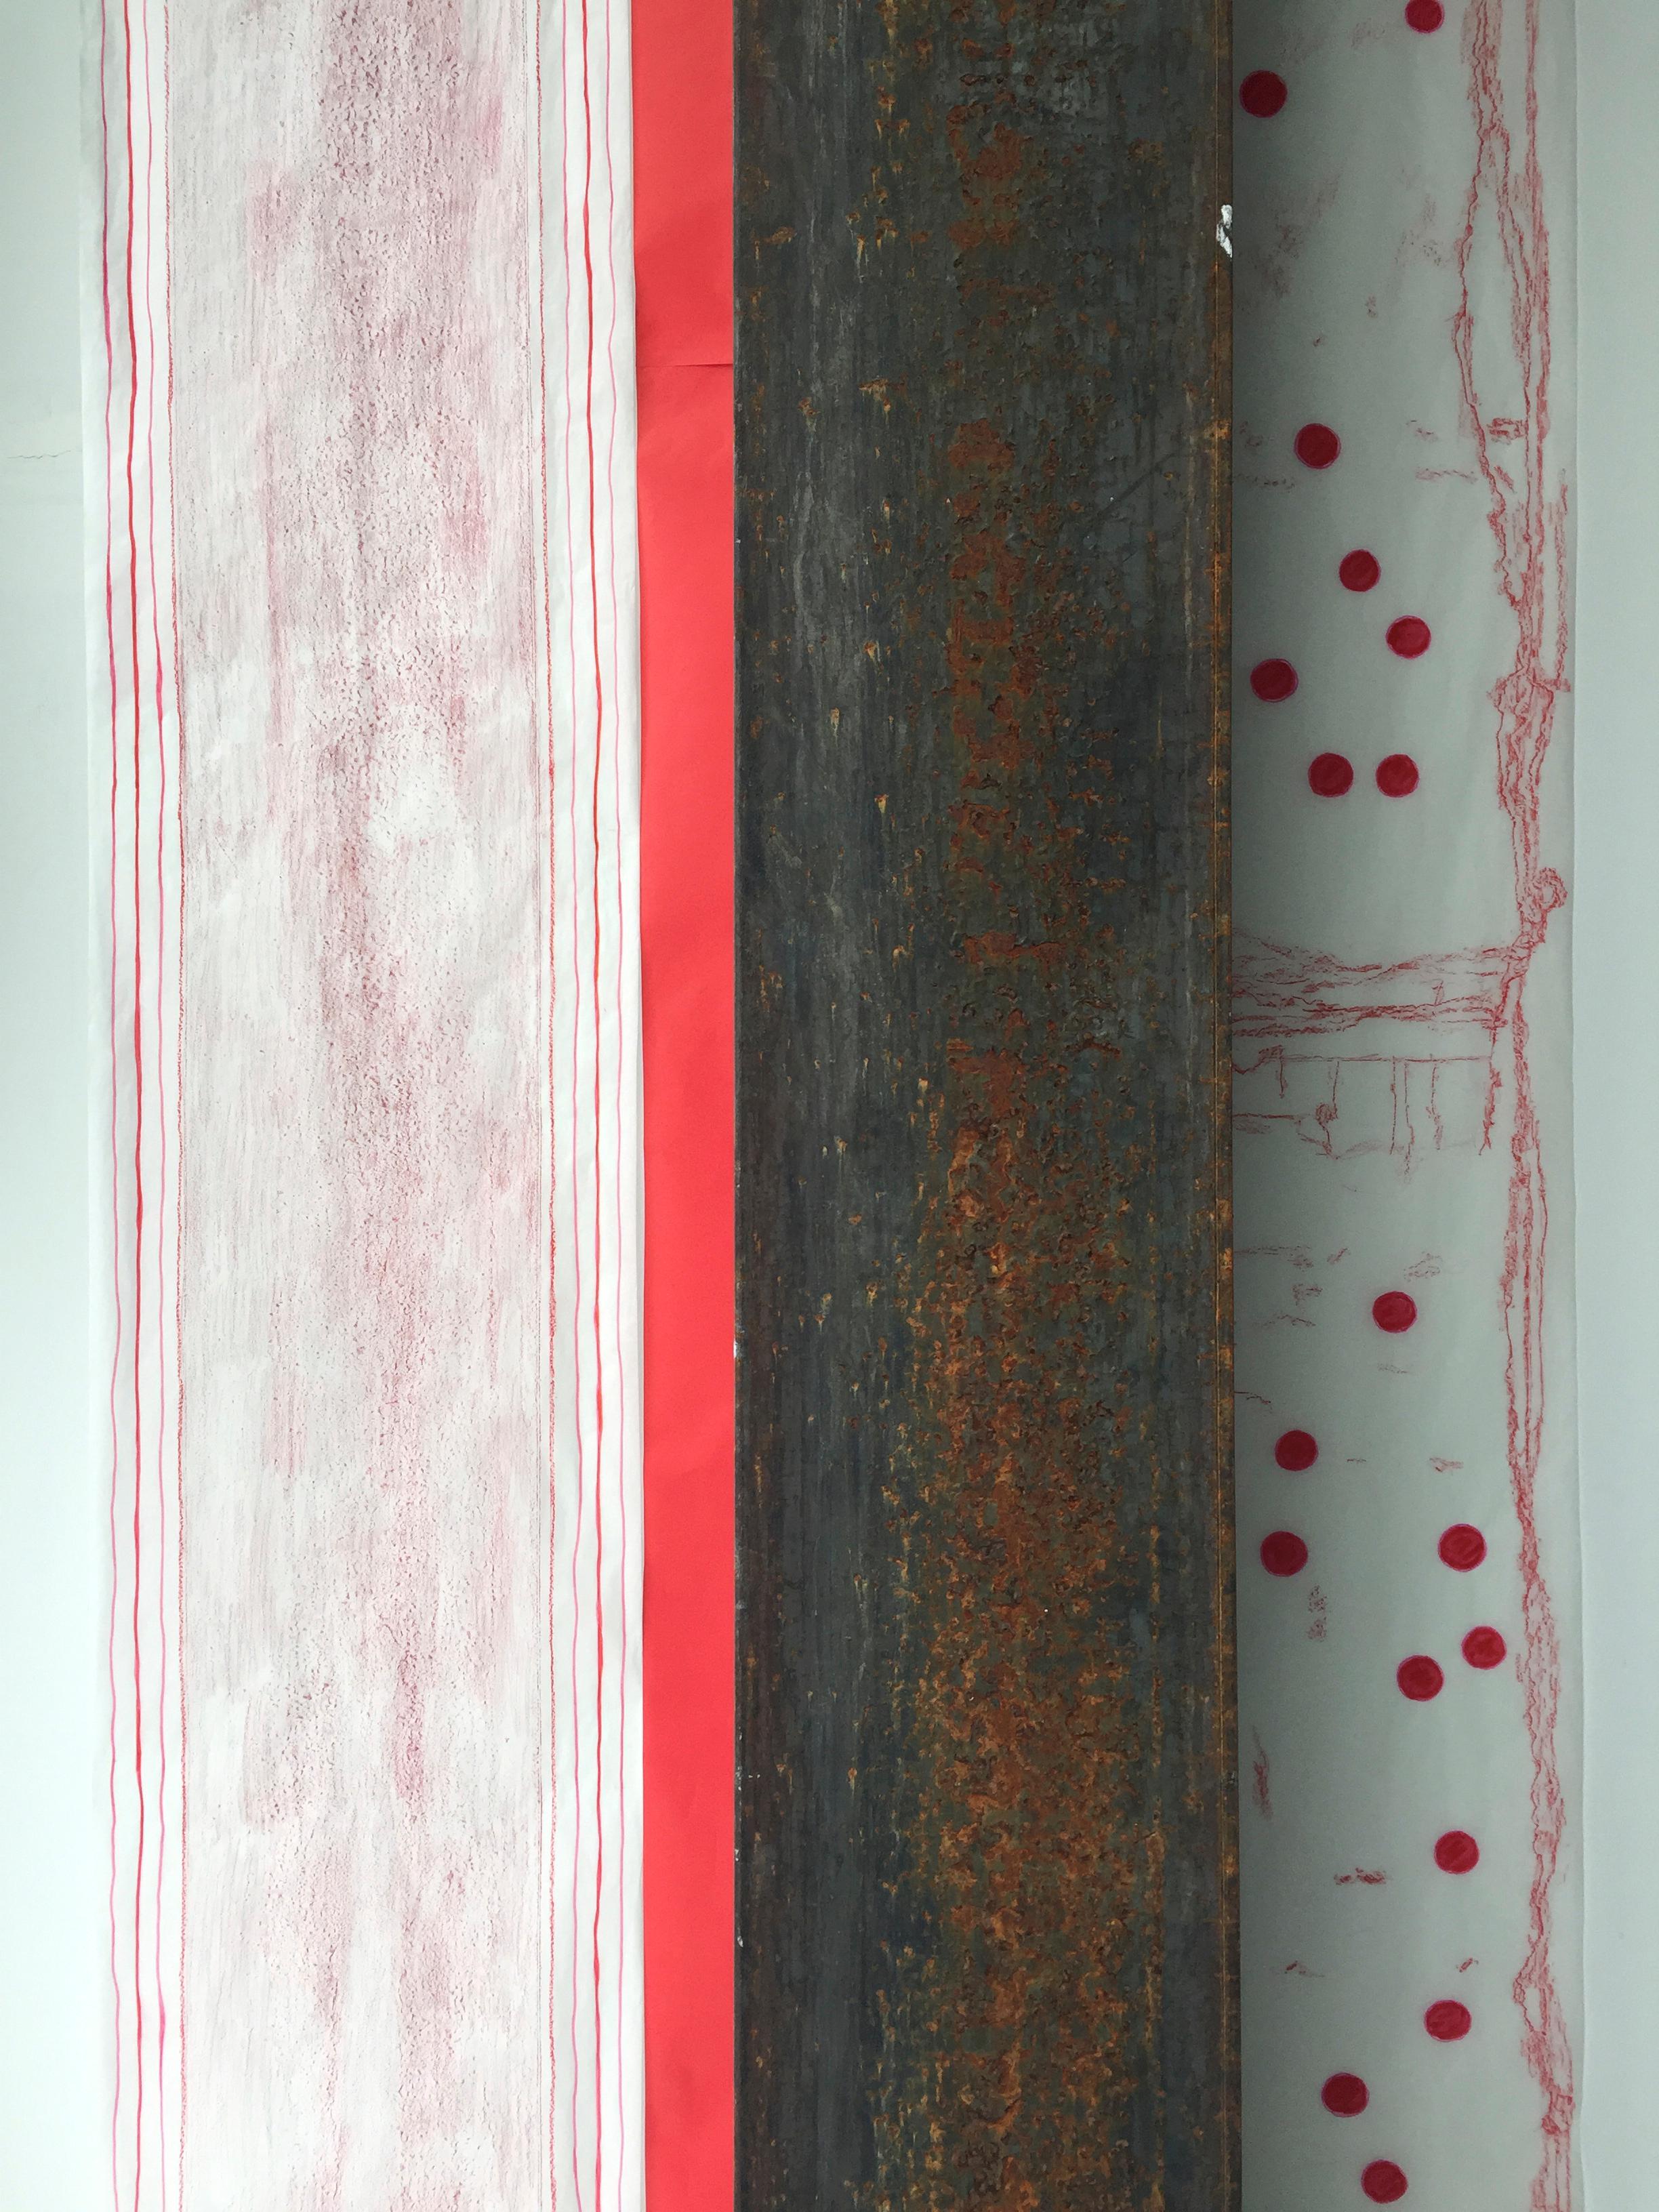 Deanna Lee, Surface Transcriptions_Red Corner, 2019, site responsive drawing 1